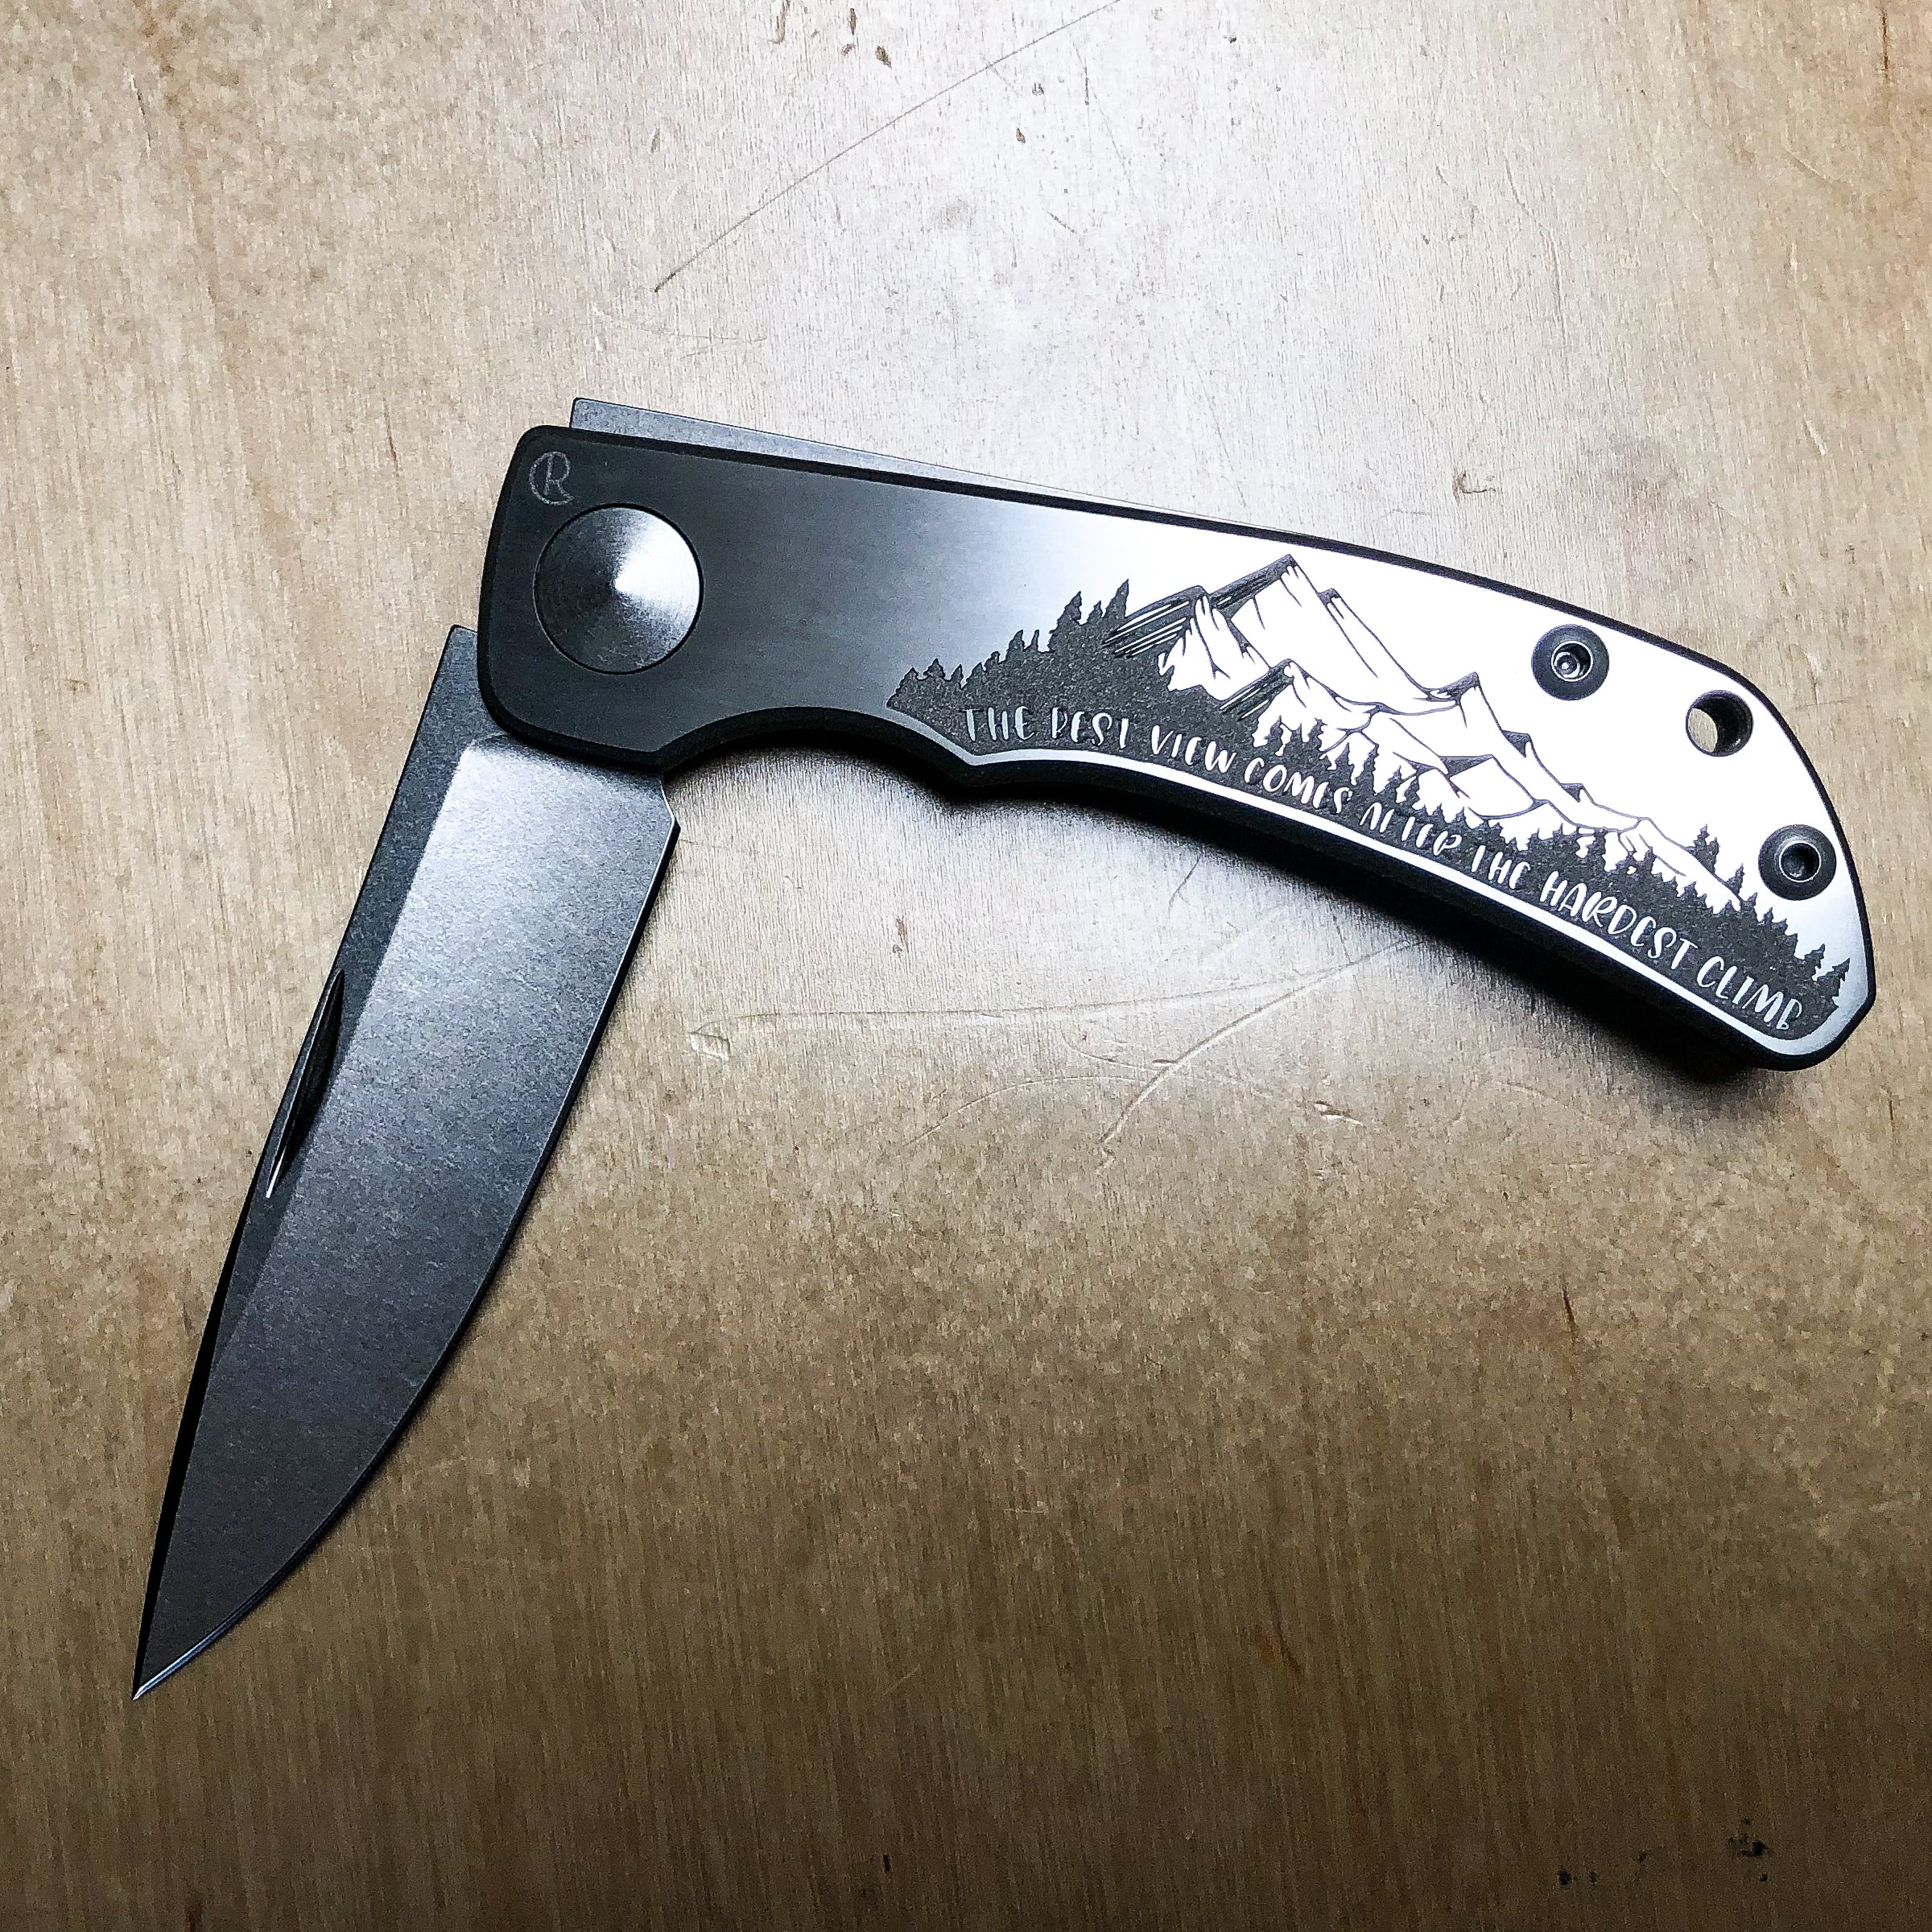 Chris Reeve Knives Impinda - Blade Show 2021 "The Best Views Come After the Hardest Climb" CAD Custom - CPM-35VN - IMP-1026